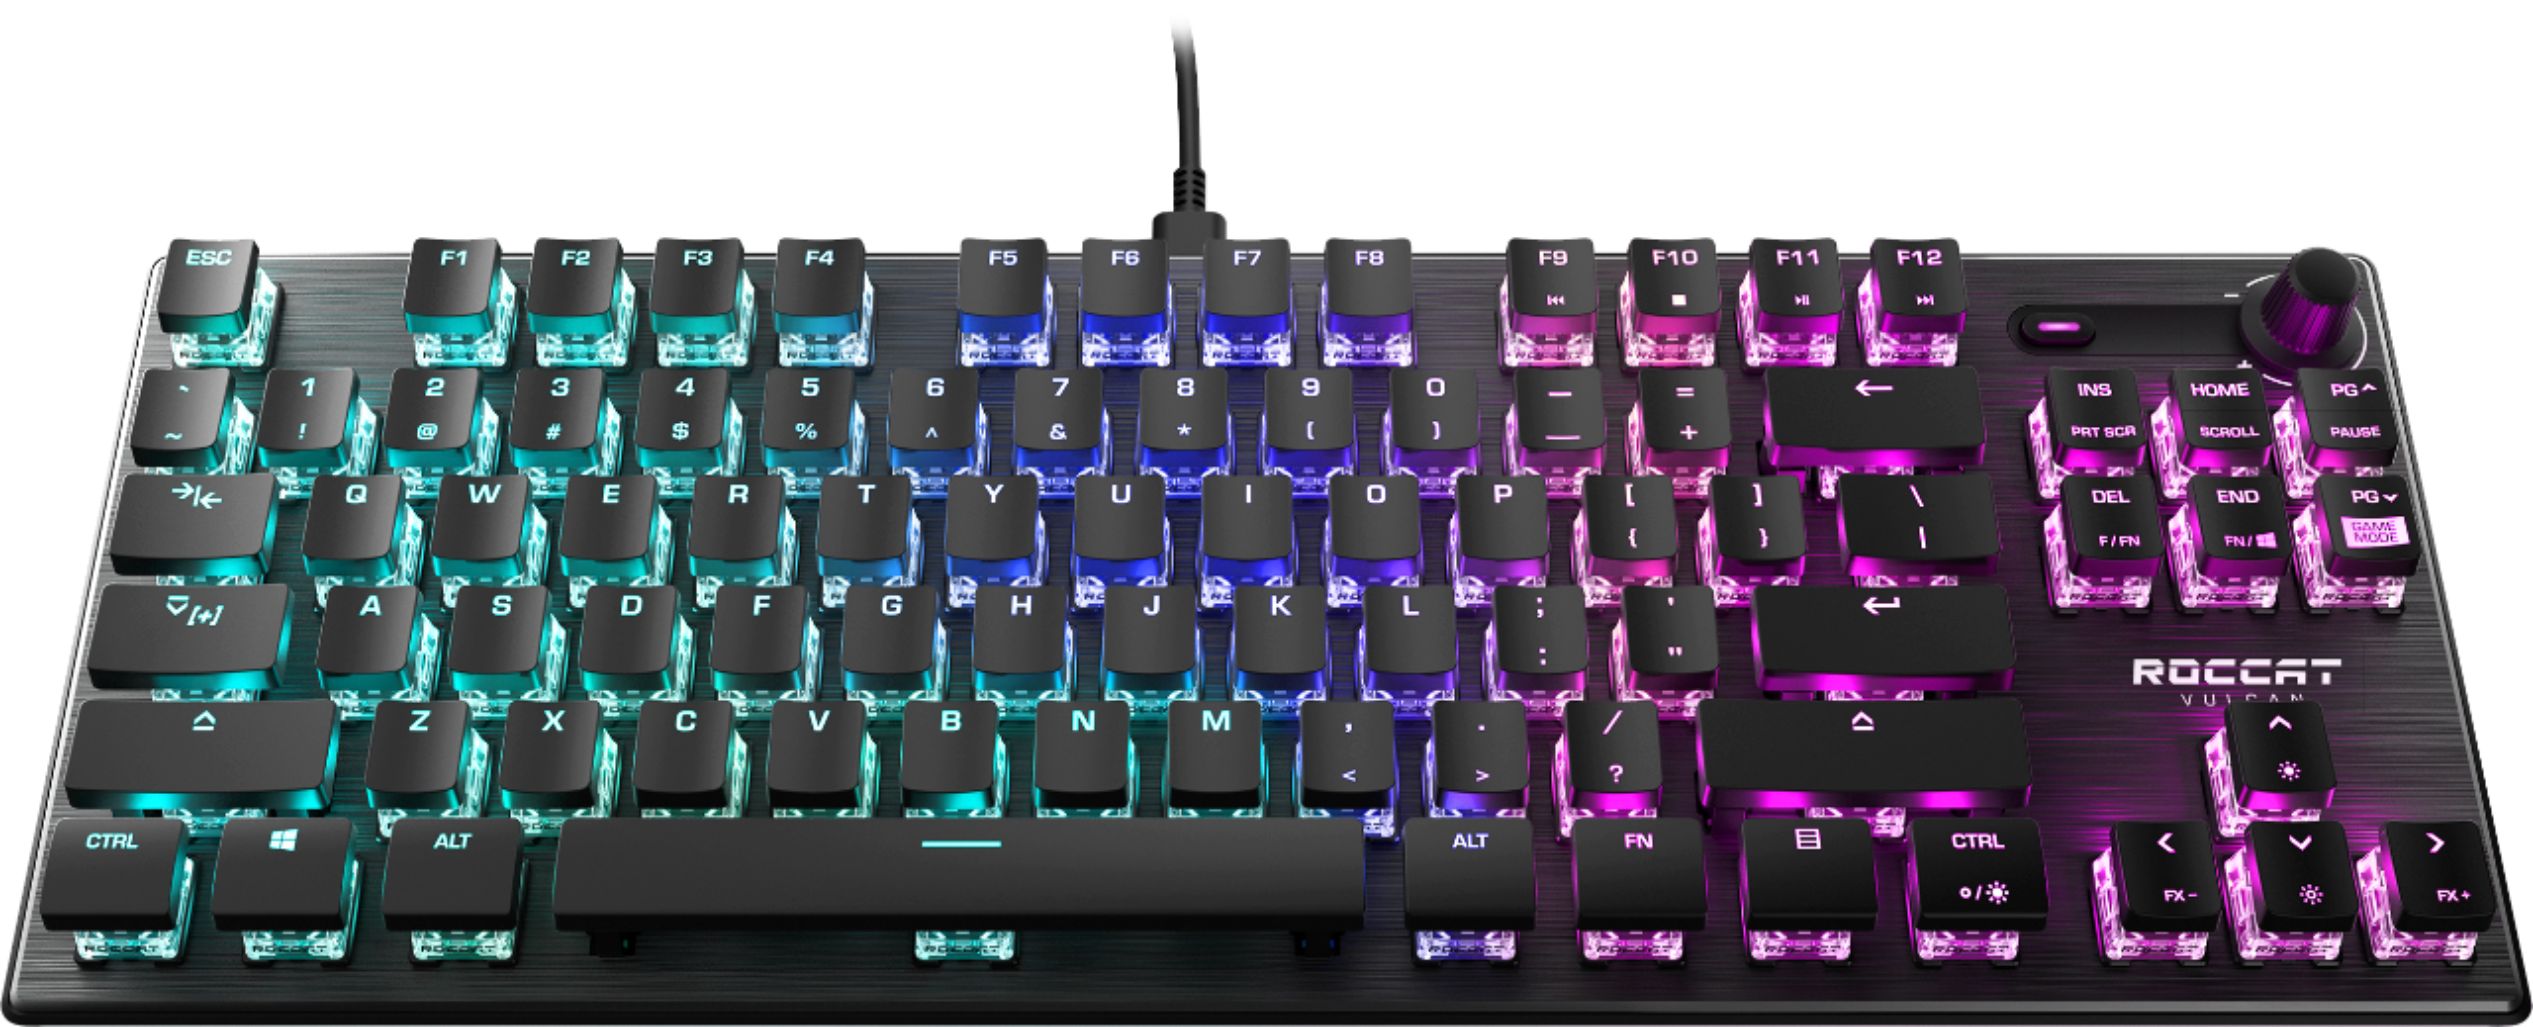 Gaming Compact Plate and Anodized Best Top Switch Lighting, ROCCAT Mechanical Vulcan Titan ROC-12-272 TKL Buy Black Linear, RGB - Aluminum Keyboard with